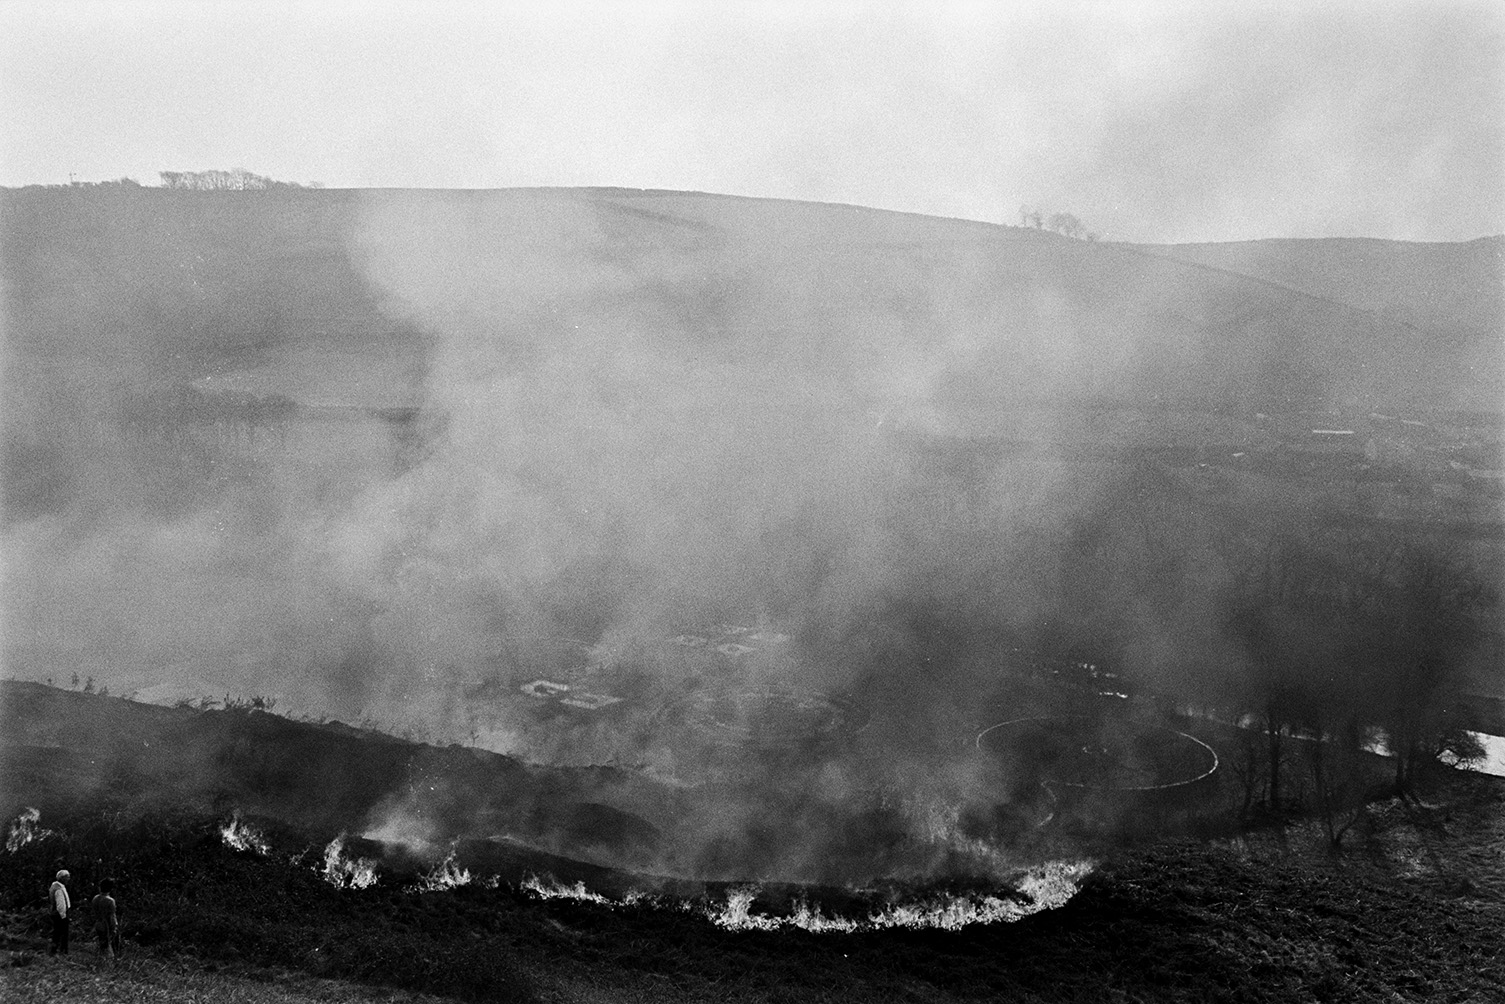 A fire on Torrington Hill to burn of surface brambles. Two people are watching the fire in the foreground. The River Torridge and a landscape of fields is visible in the background, through the smoke.